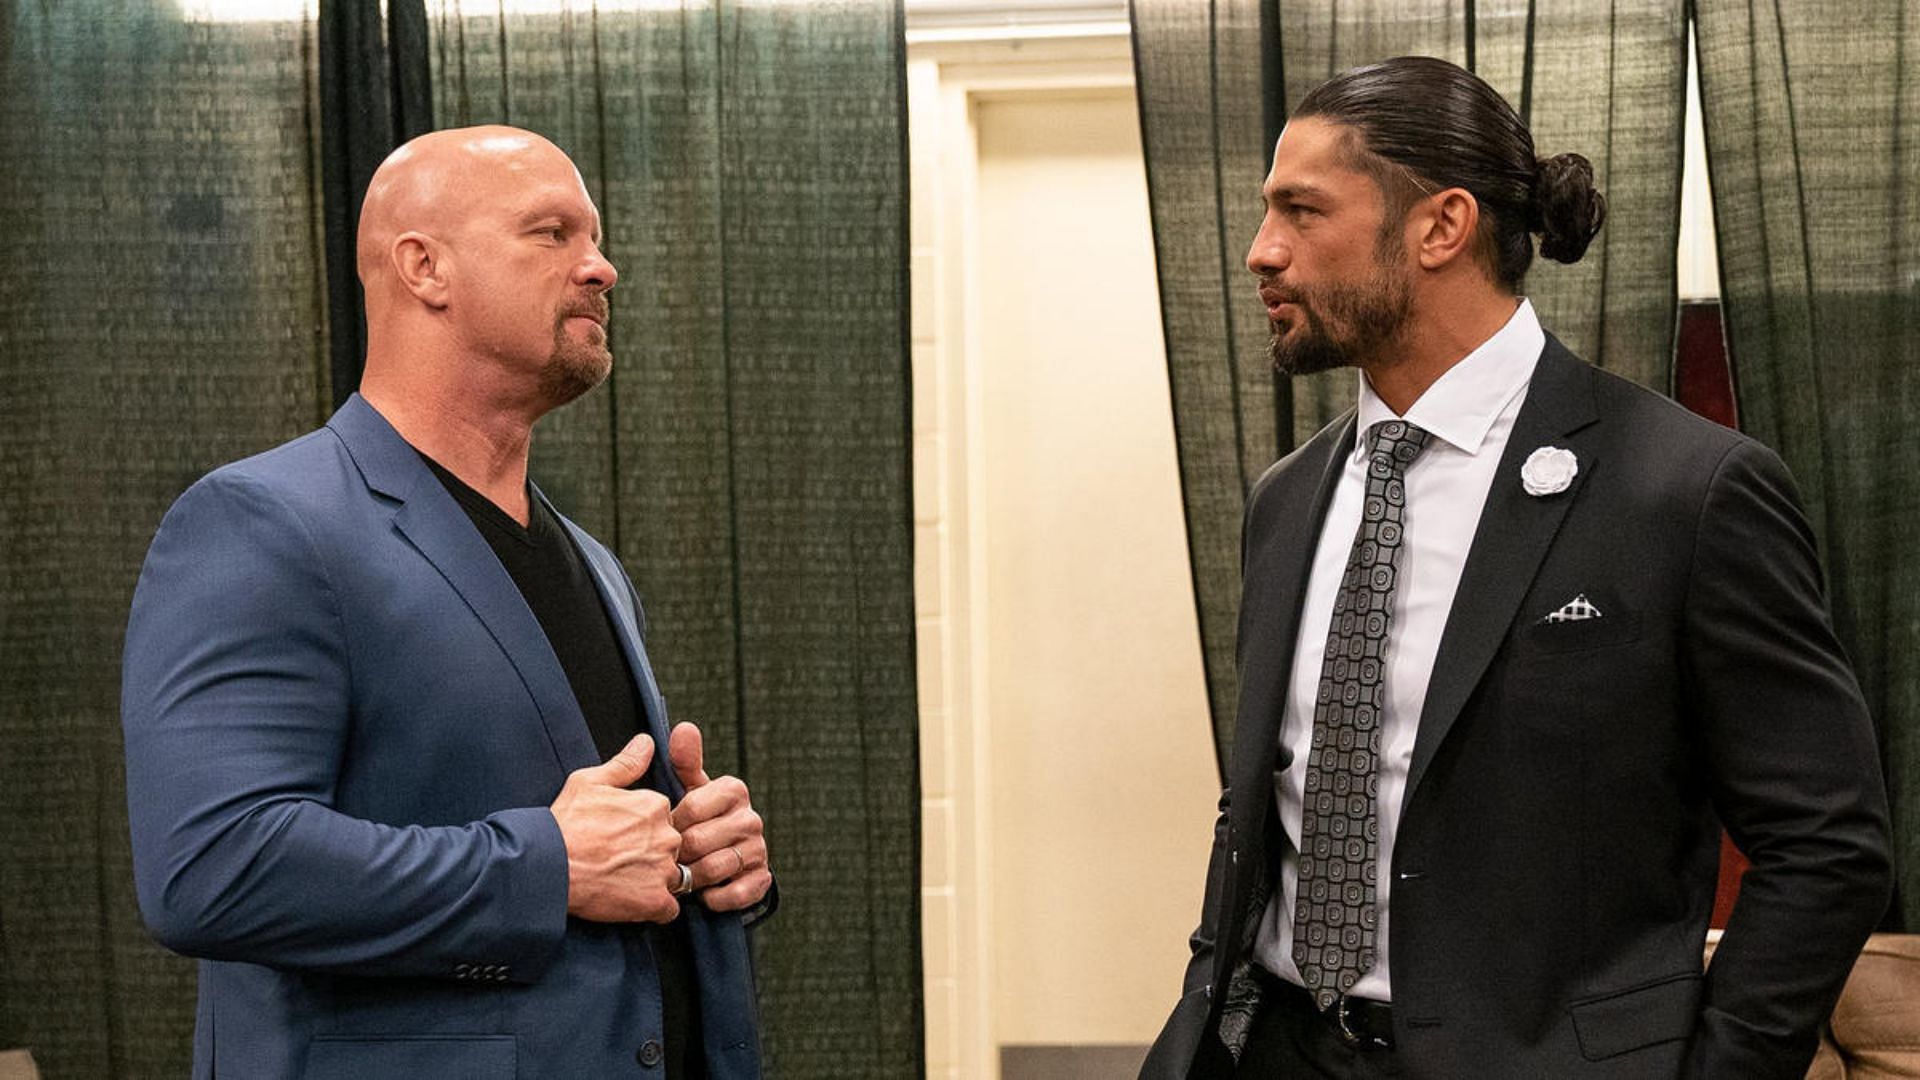 Stone Cold and Roman Reigns are two of WWE